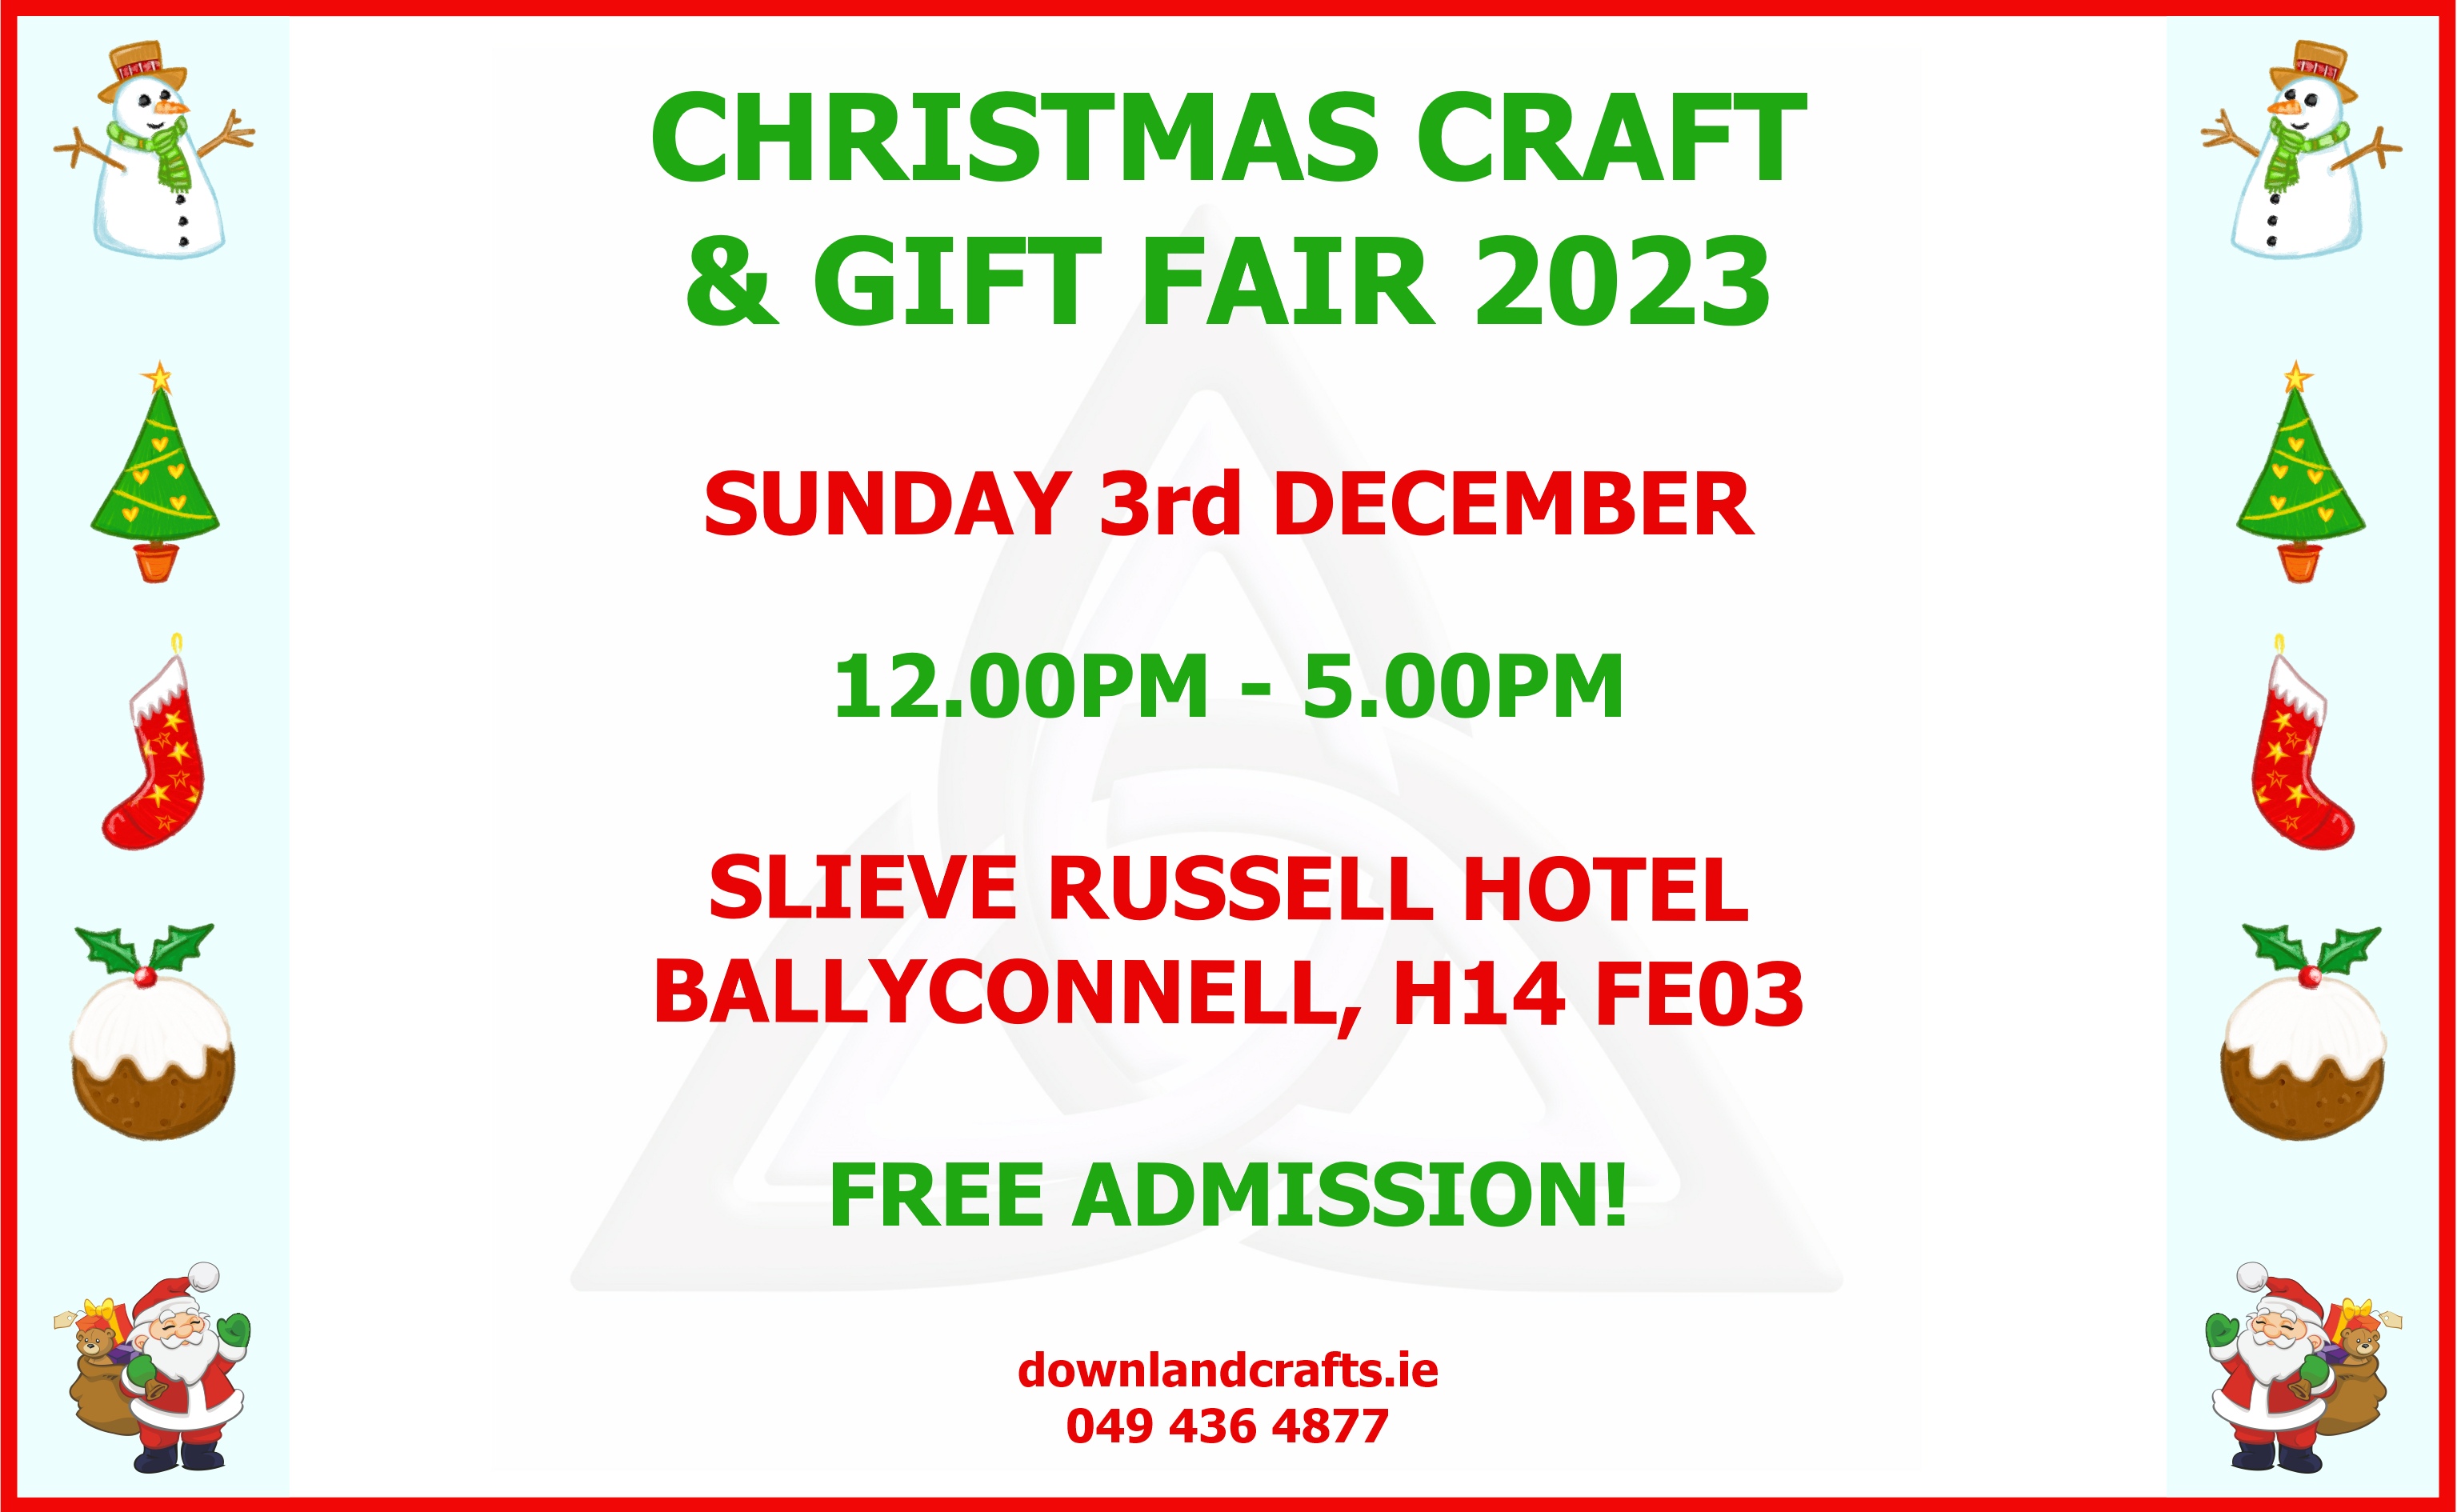 Our annual Christmas fair held in the beautiful Slieve Russell Hotel, Ballyconnell, Co. Cavan.